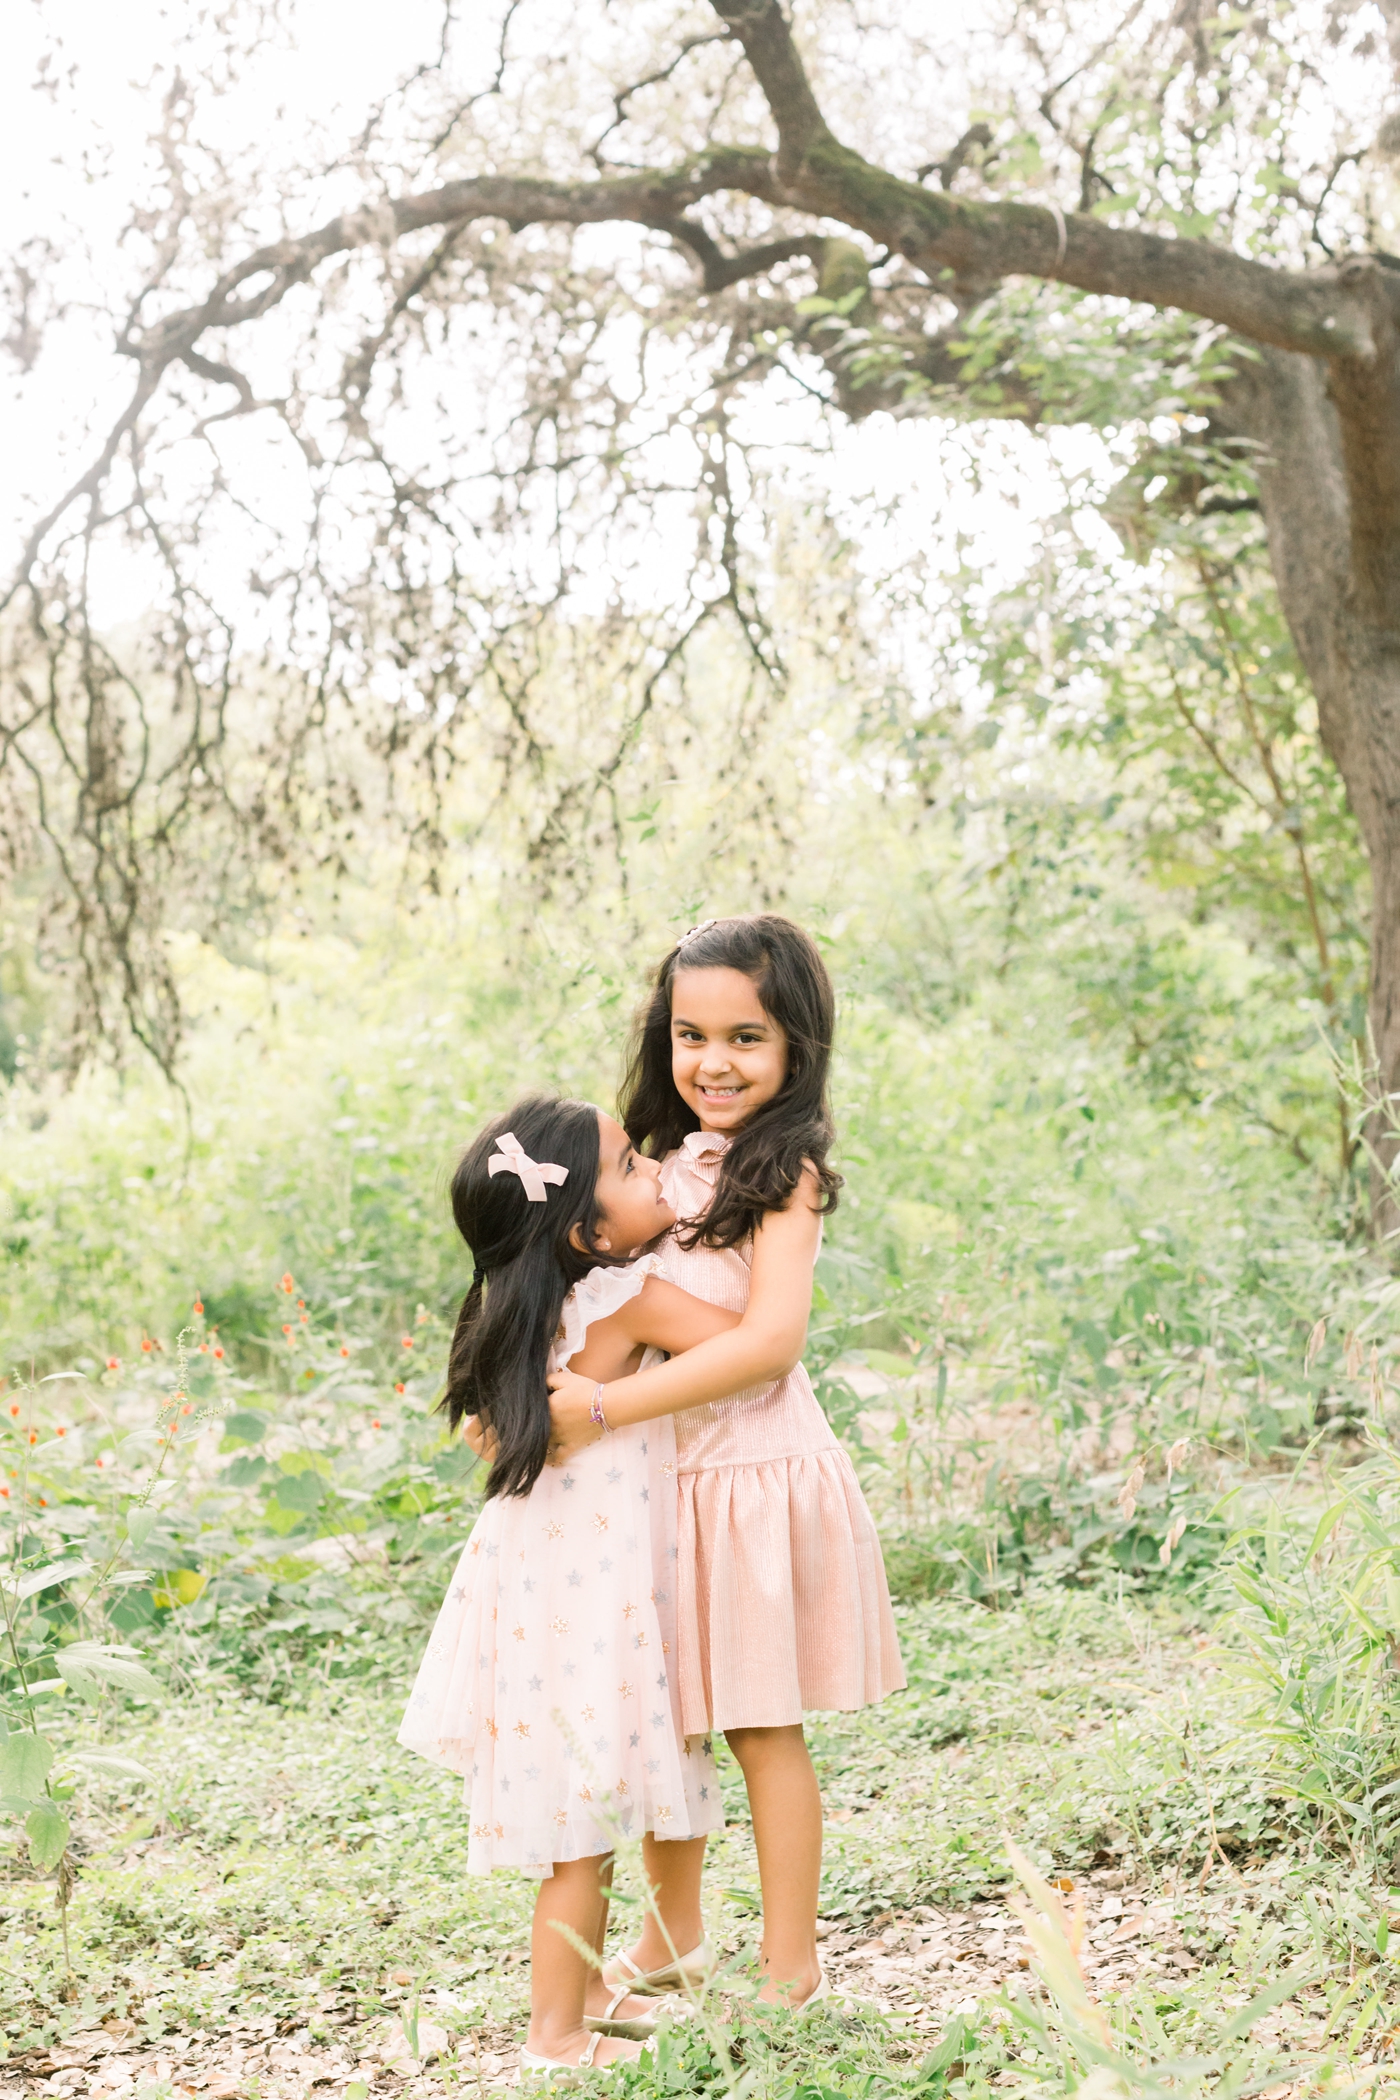 Sisters hugging during family session in field near Austin TX. Photo by Sana Ahmed Photography.